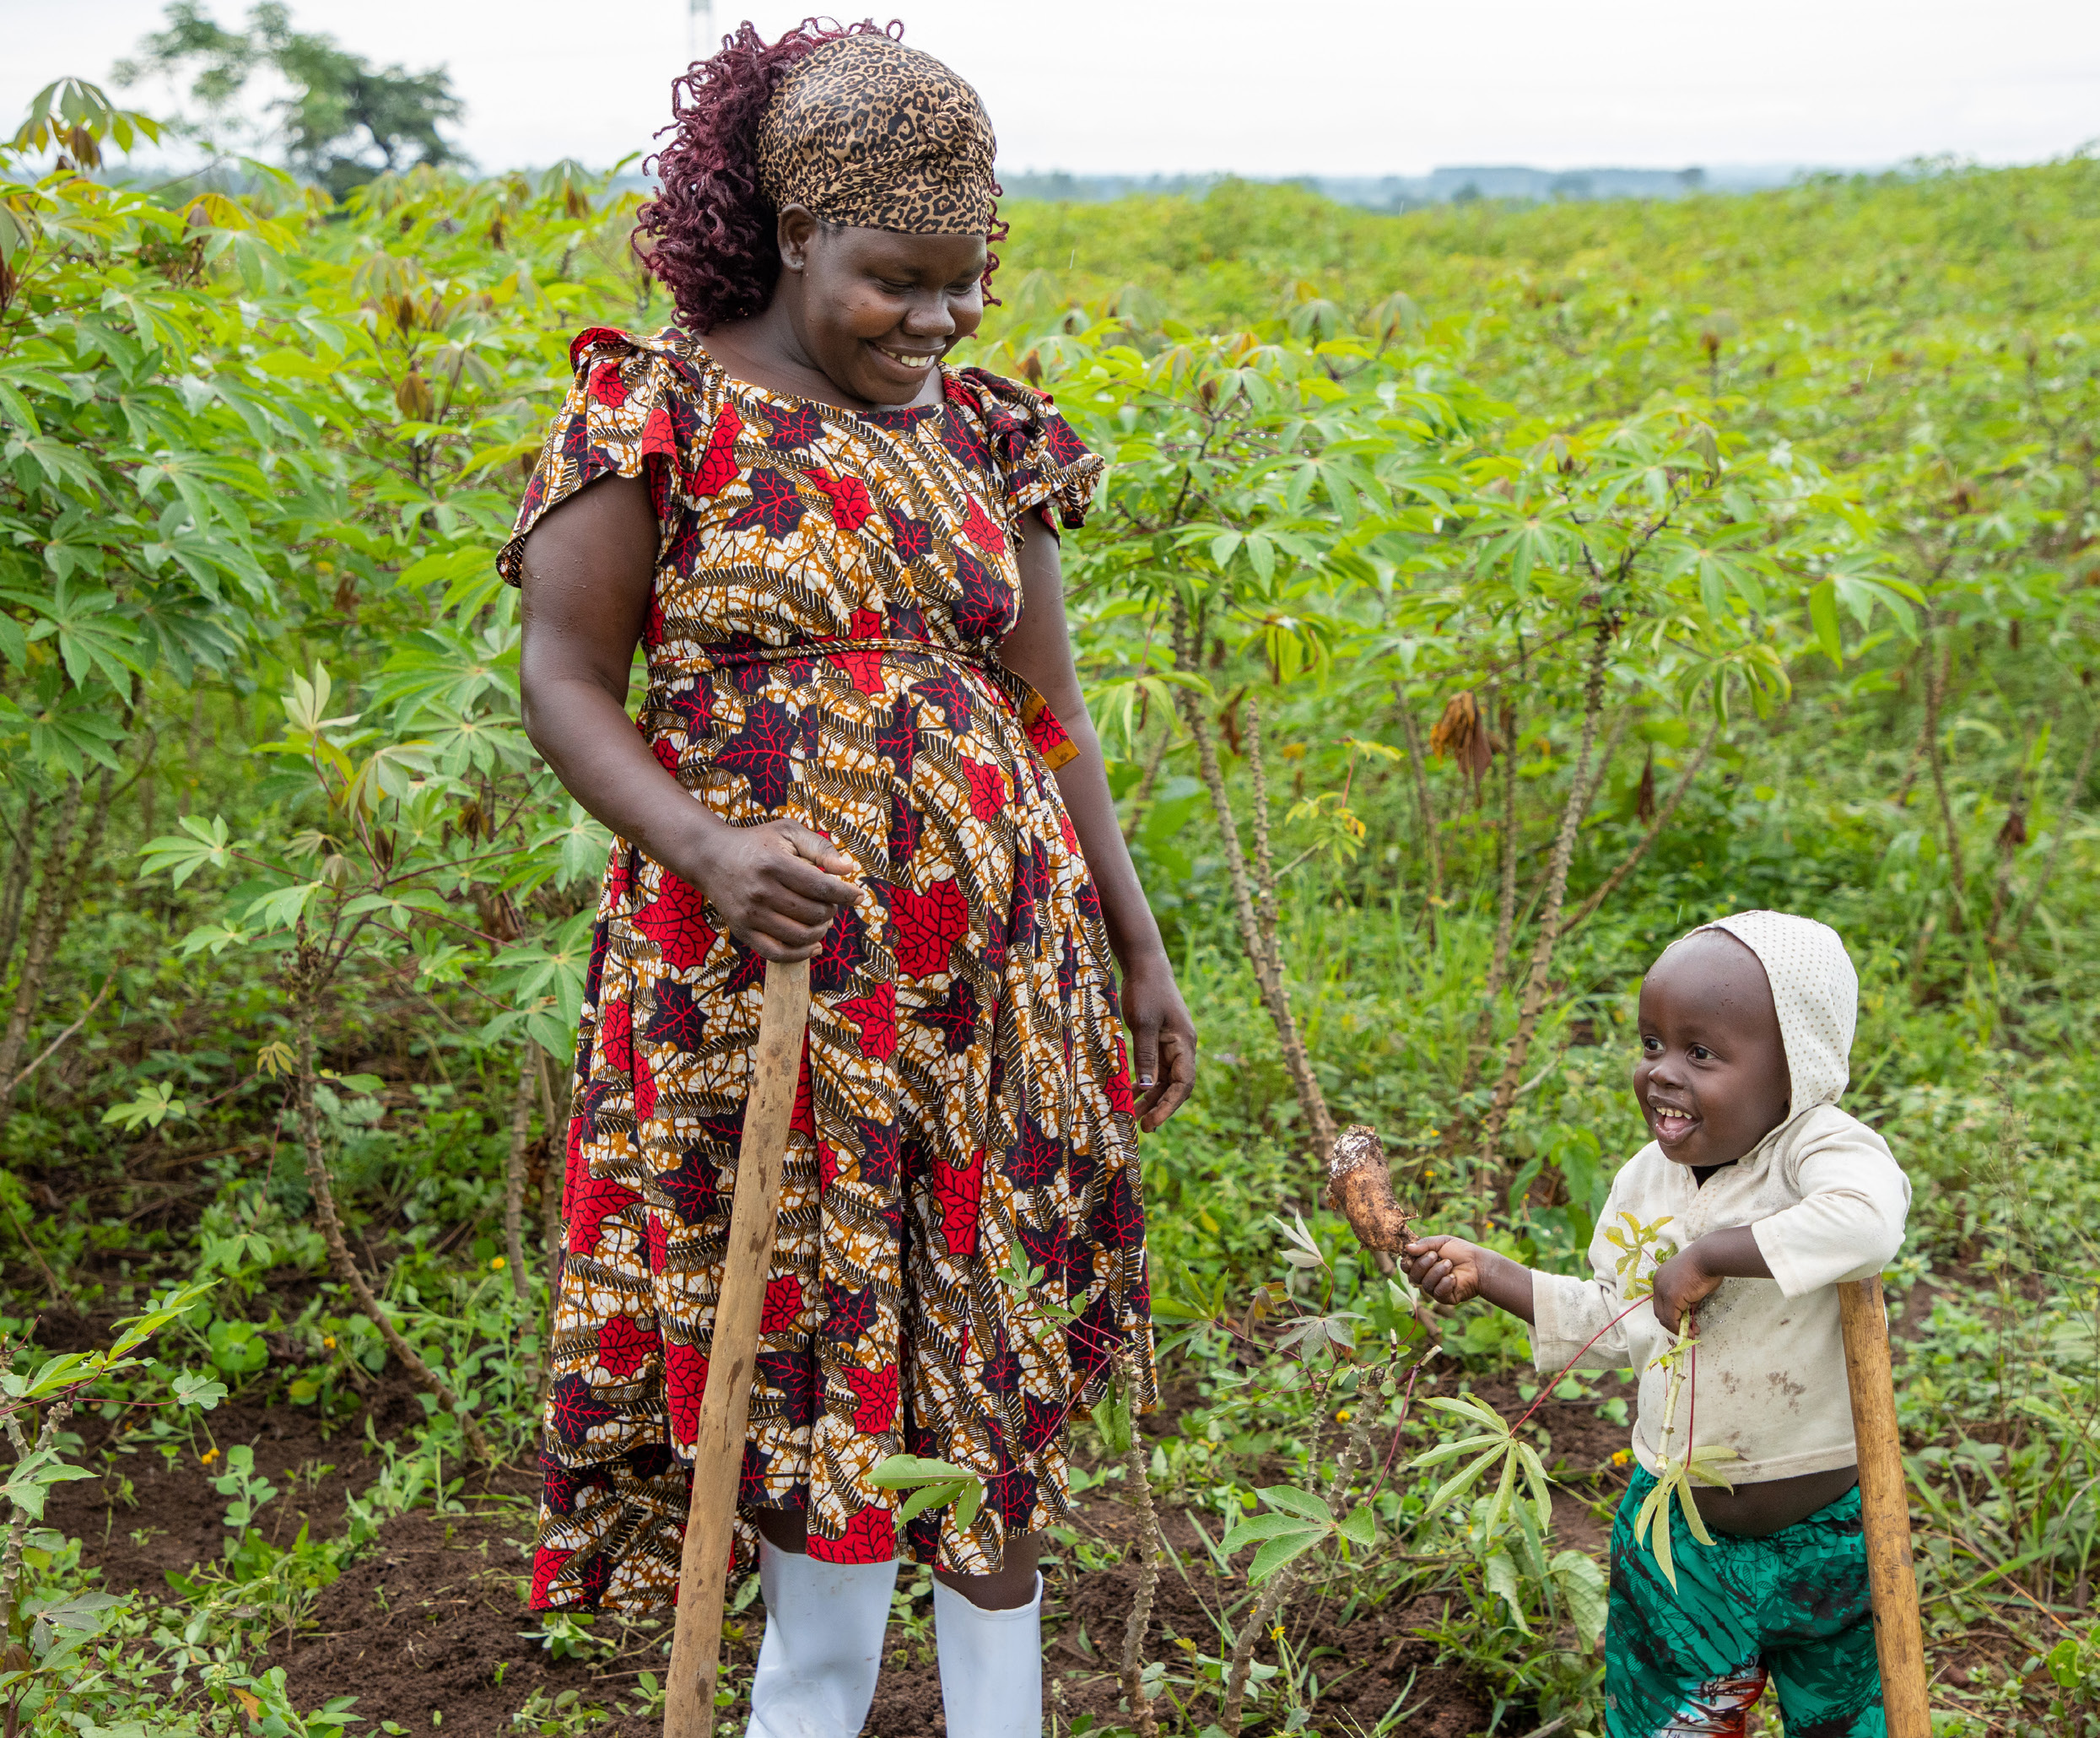 A mother looks at her child holding food in a green field.